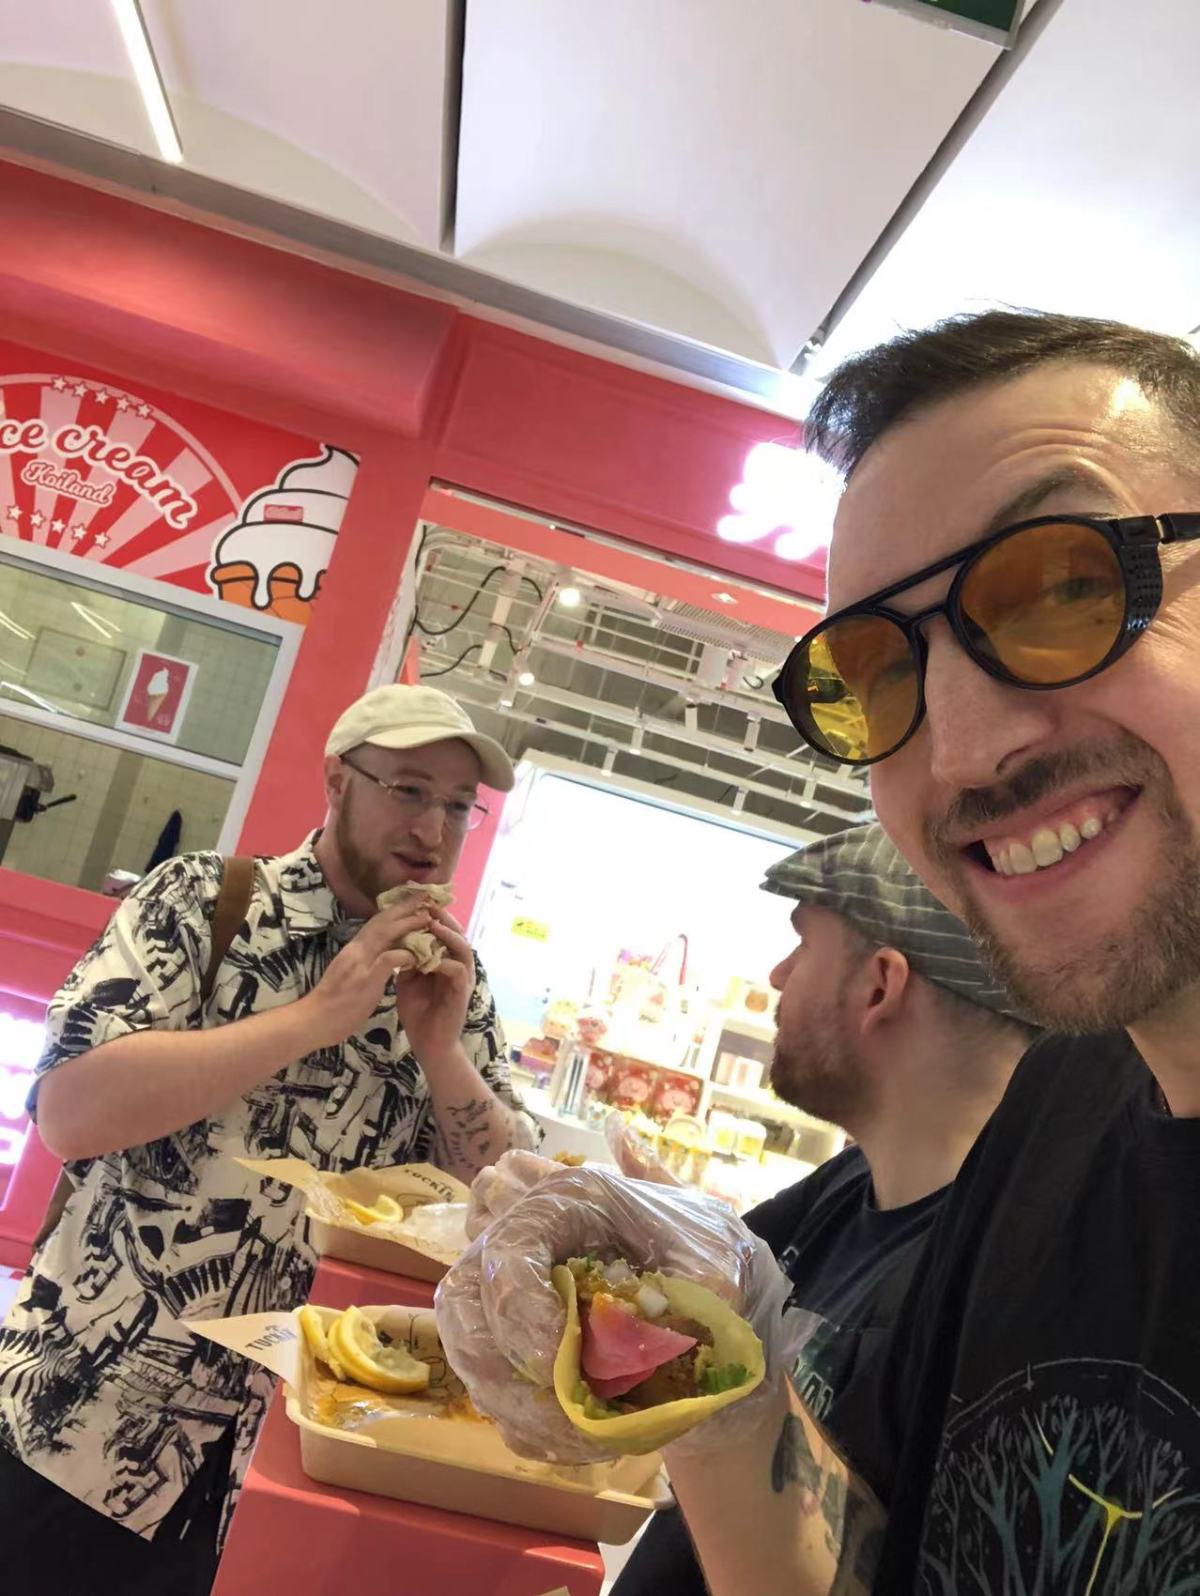 A Frenchman, a British guy and a Canadian walk into a taco shop in Chongqing.